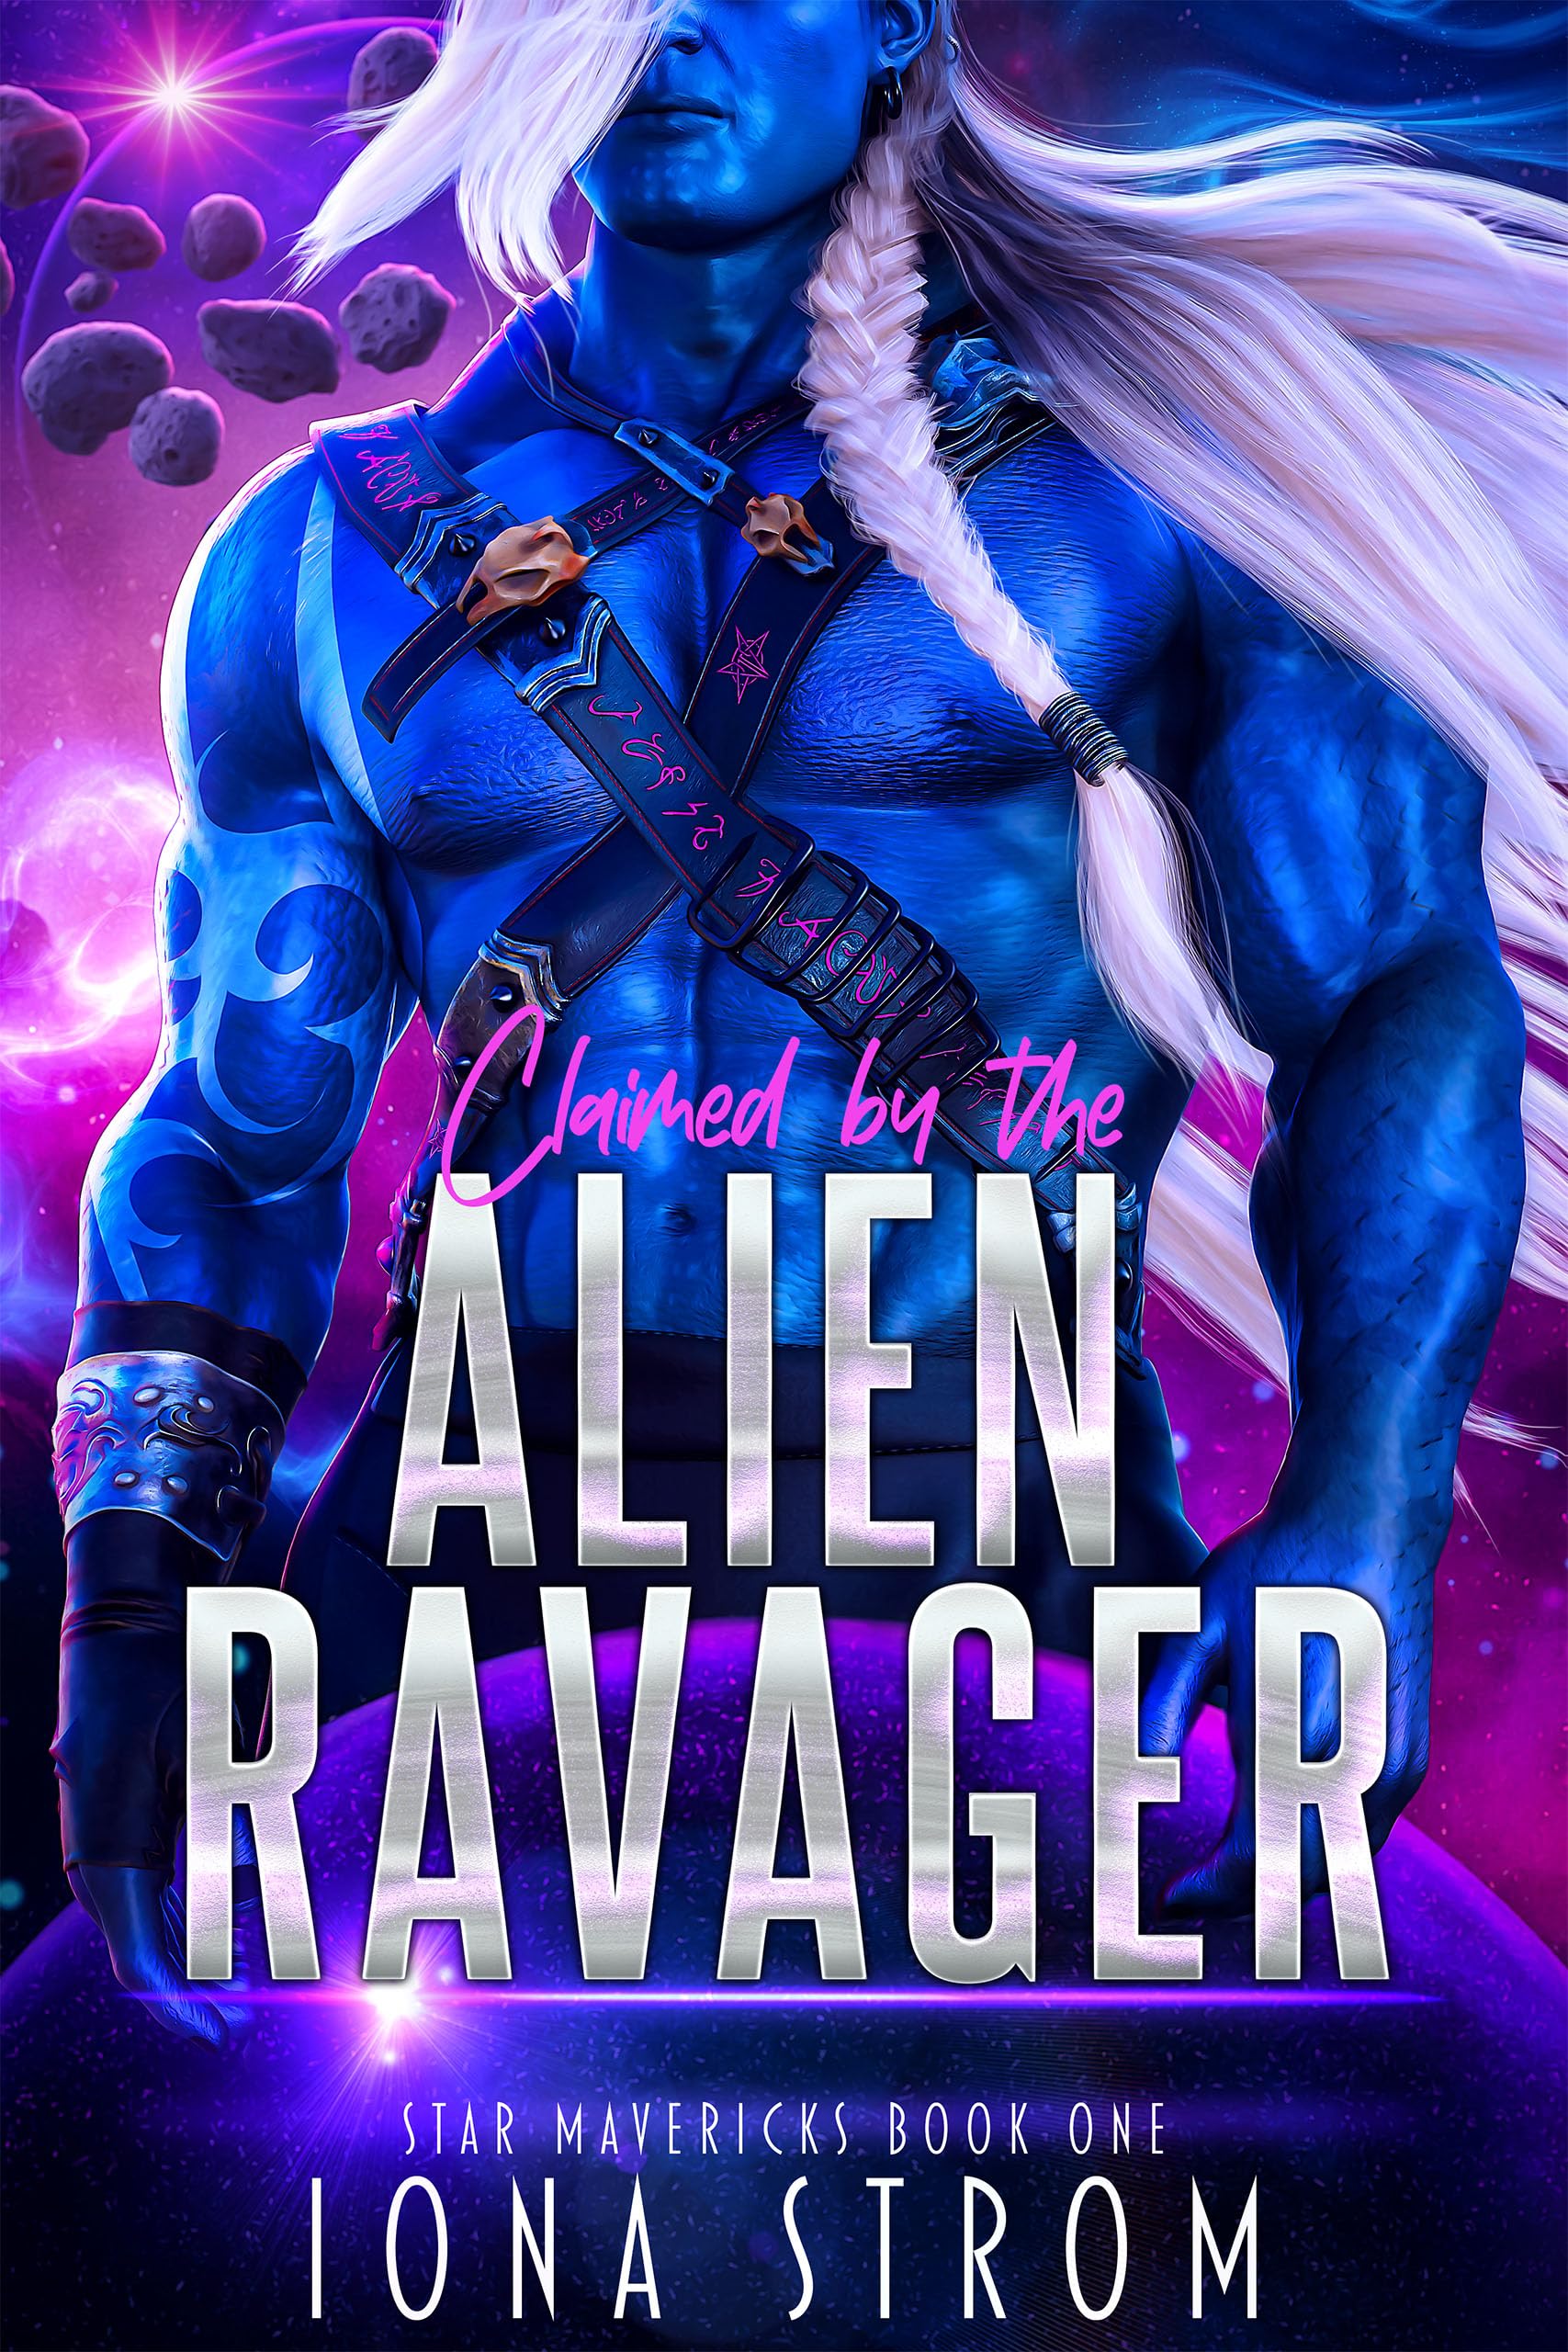 Claimed by the Alien Ravager (Star Mavericks Book 1)